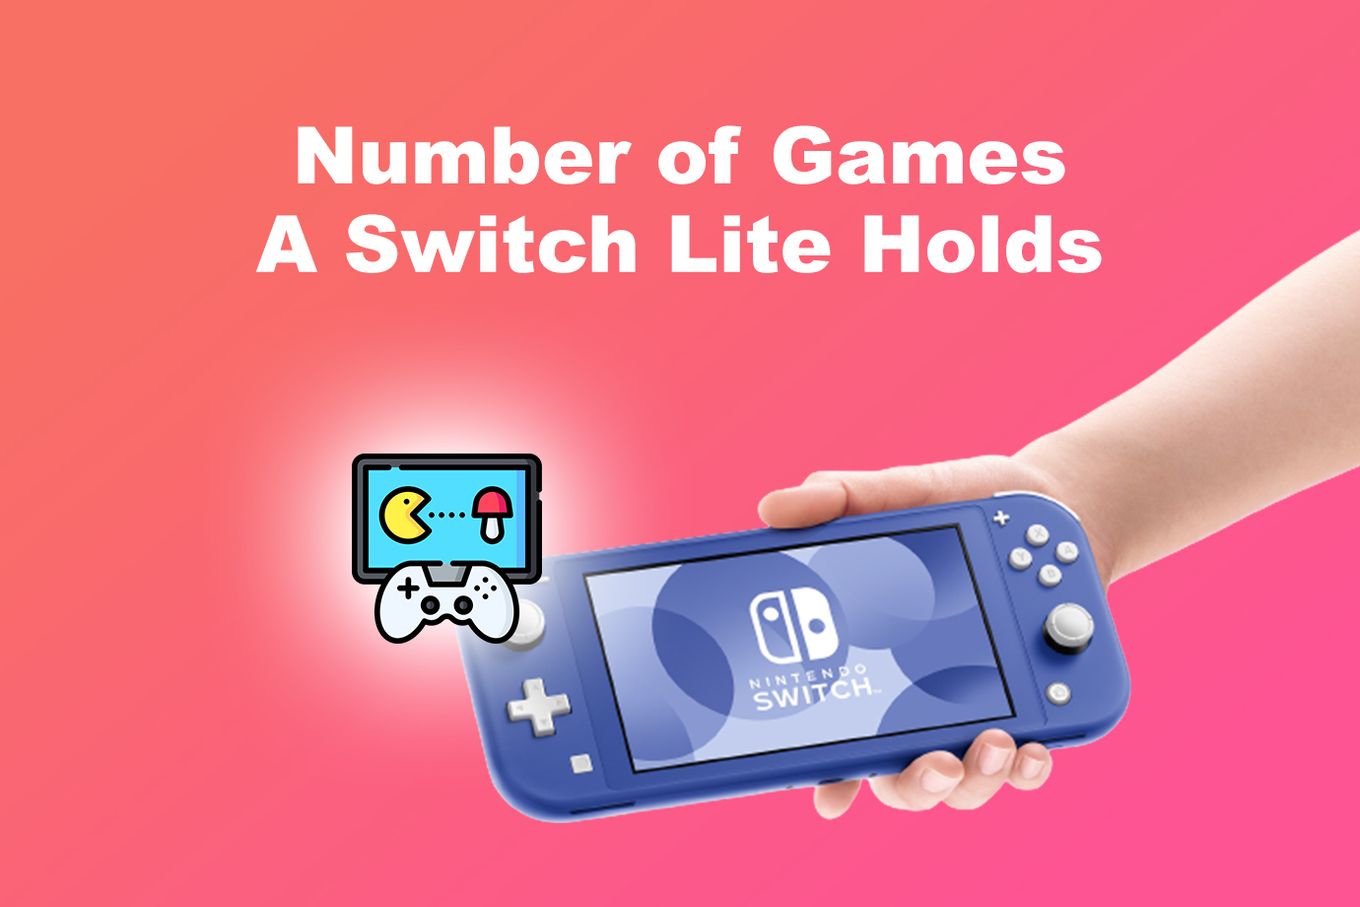 How to Install and Play Roblox on Nintendo Switch Lite?